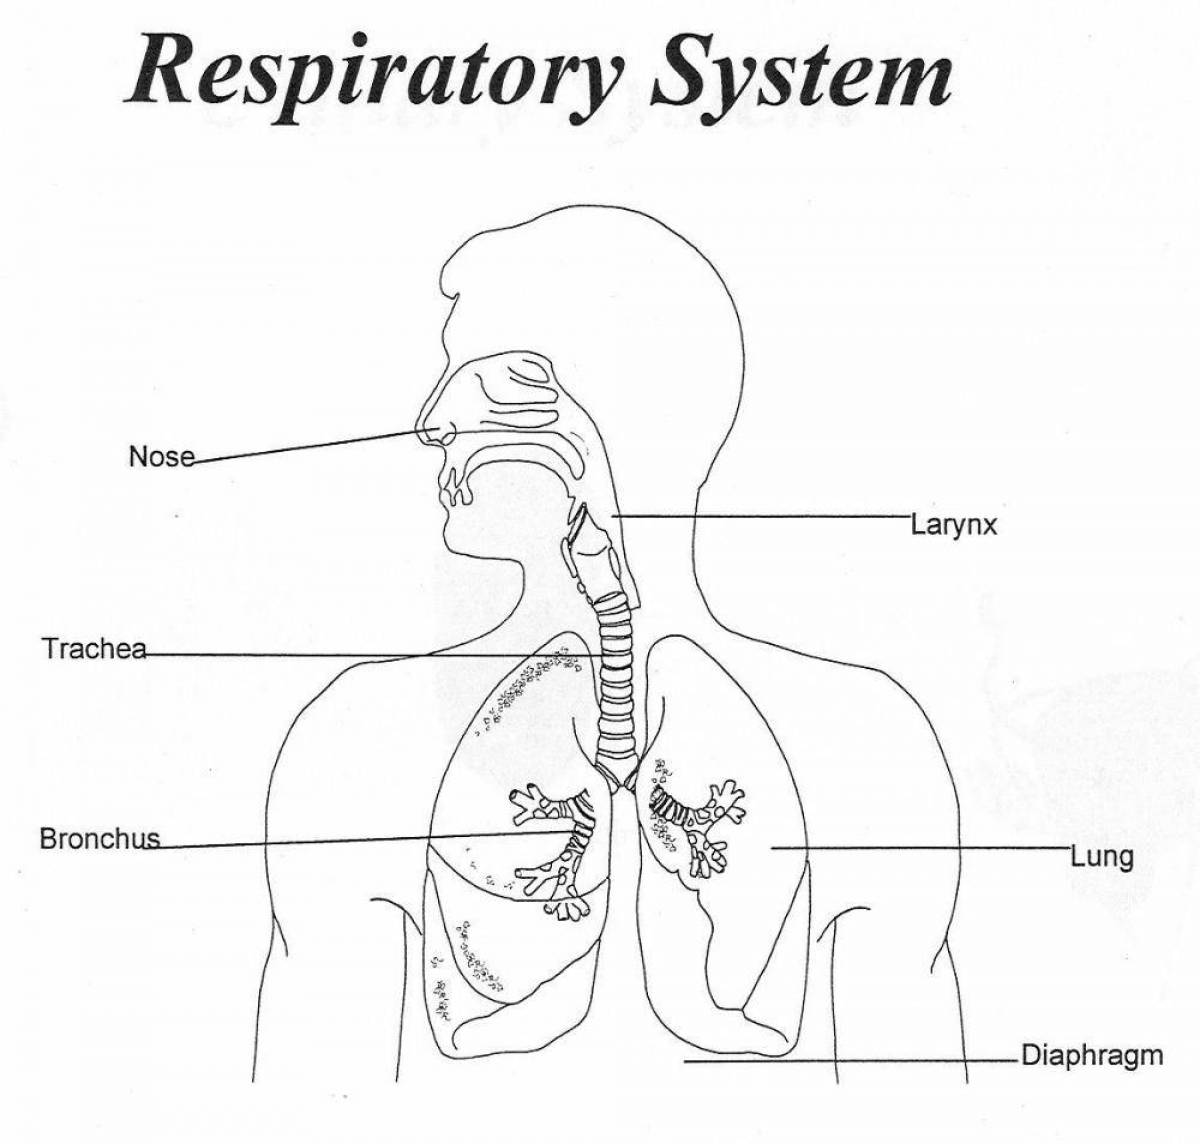 Entertaining coloring of the respiratory system